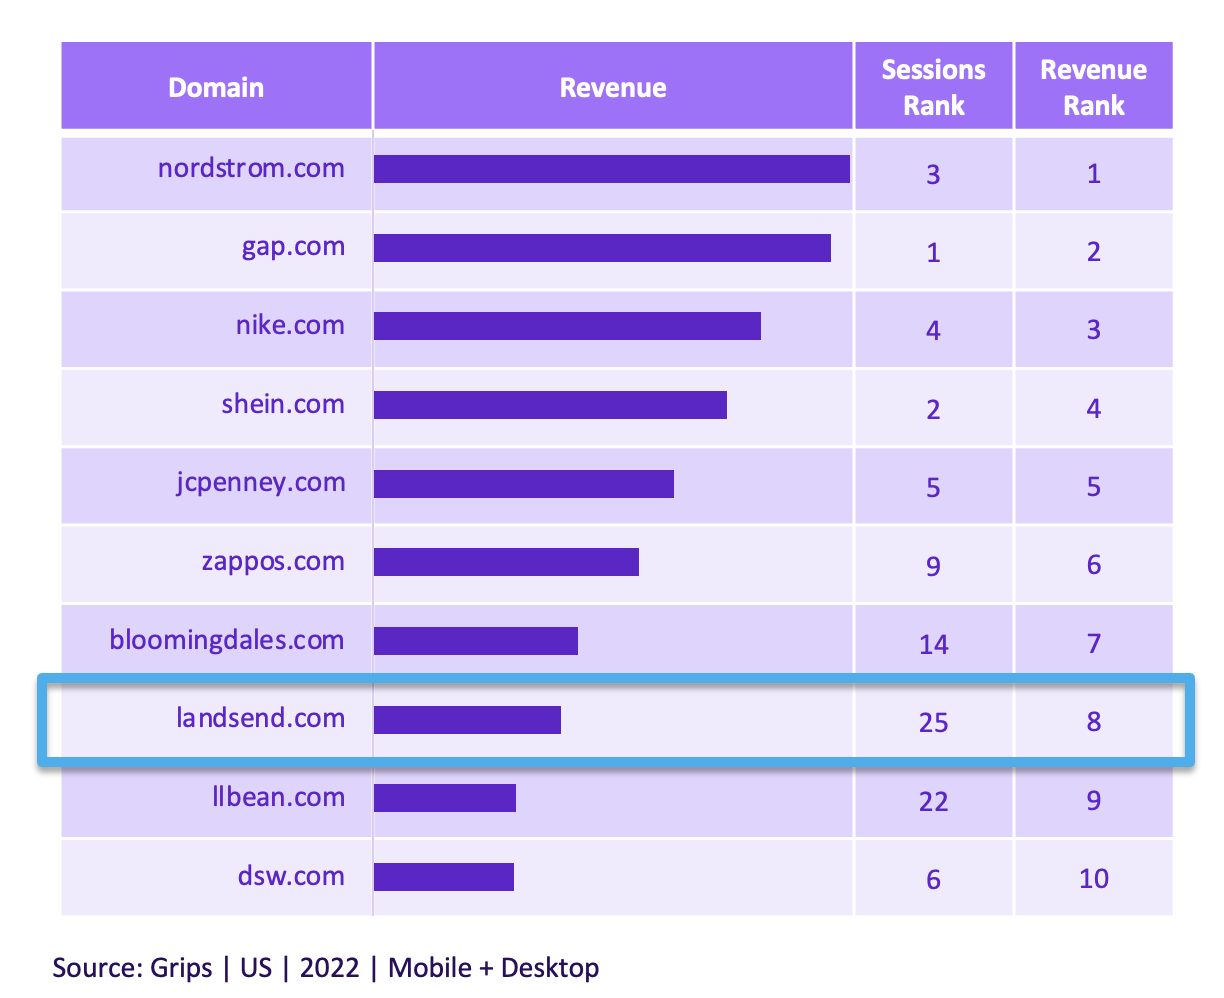 Top US fashion and apparel sites ranked by mobile and desktop revenue